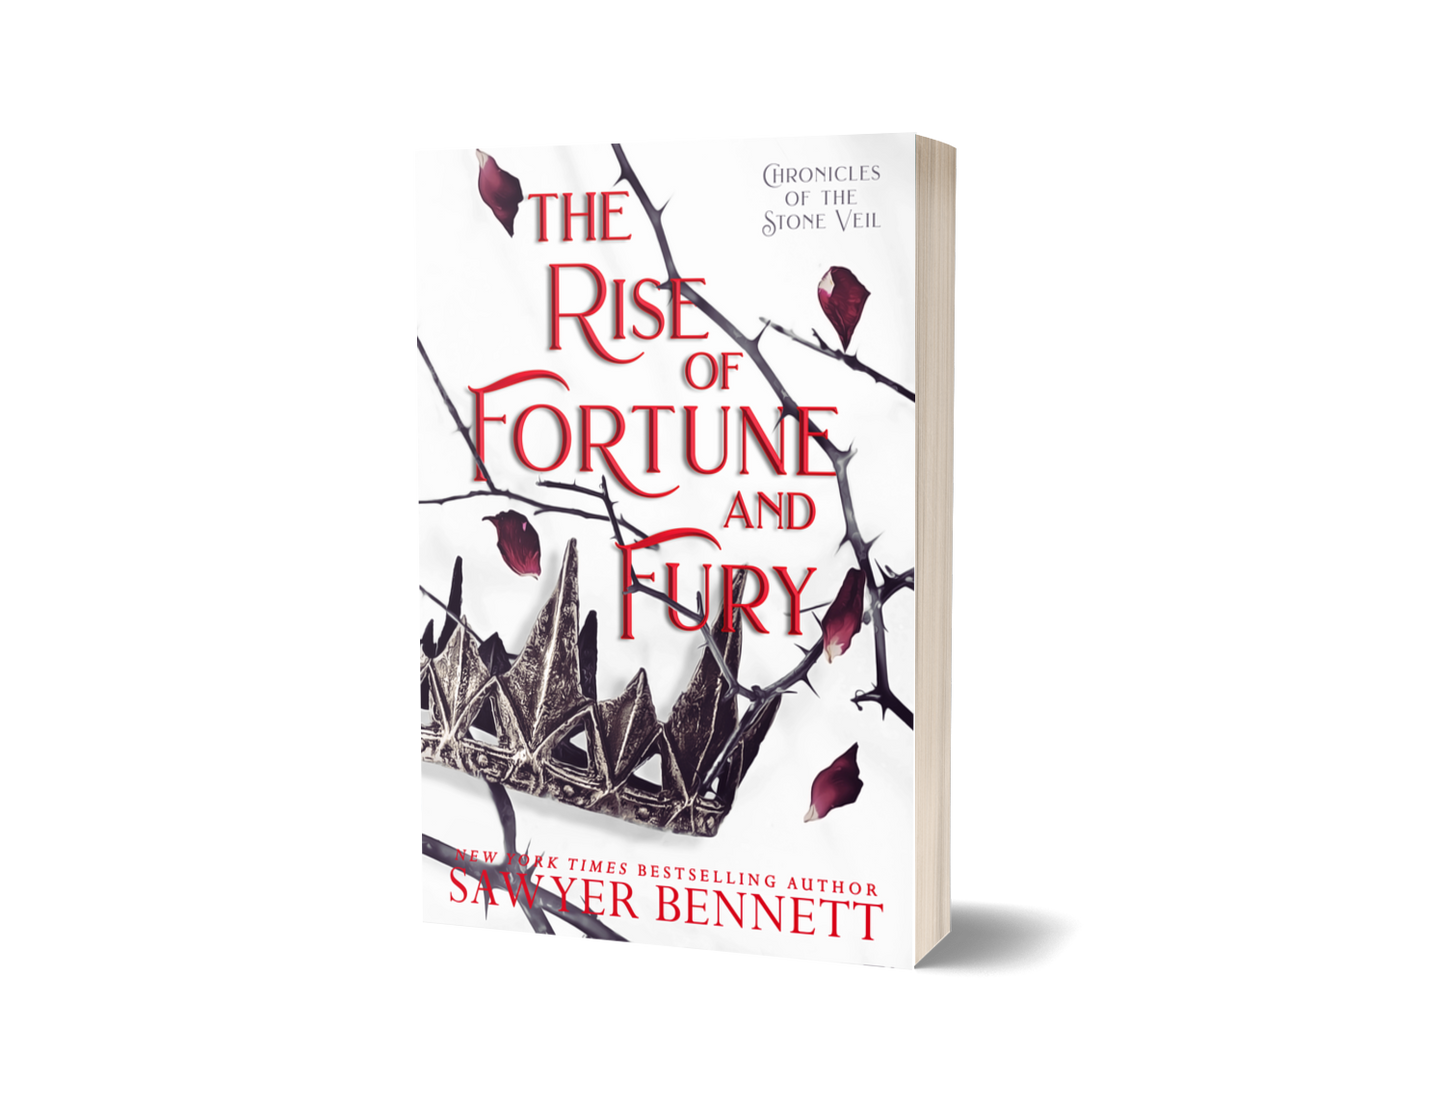 The Rise of Fortune and Fury - Sawyer Bennett